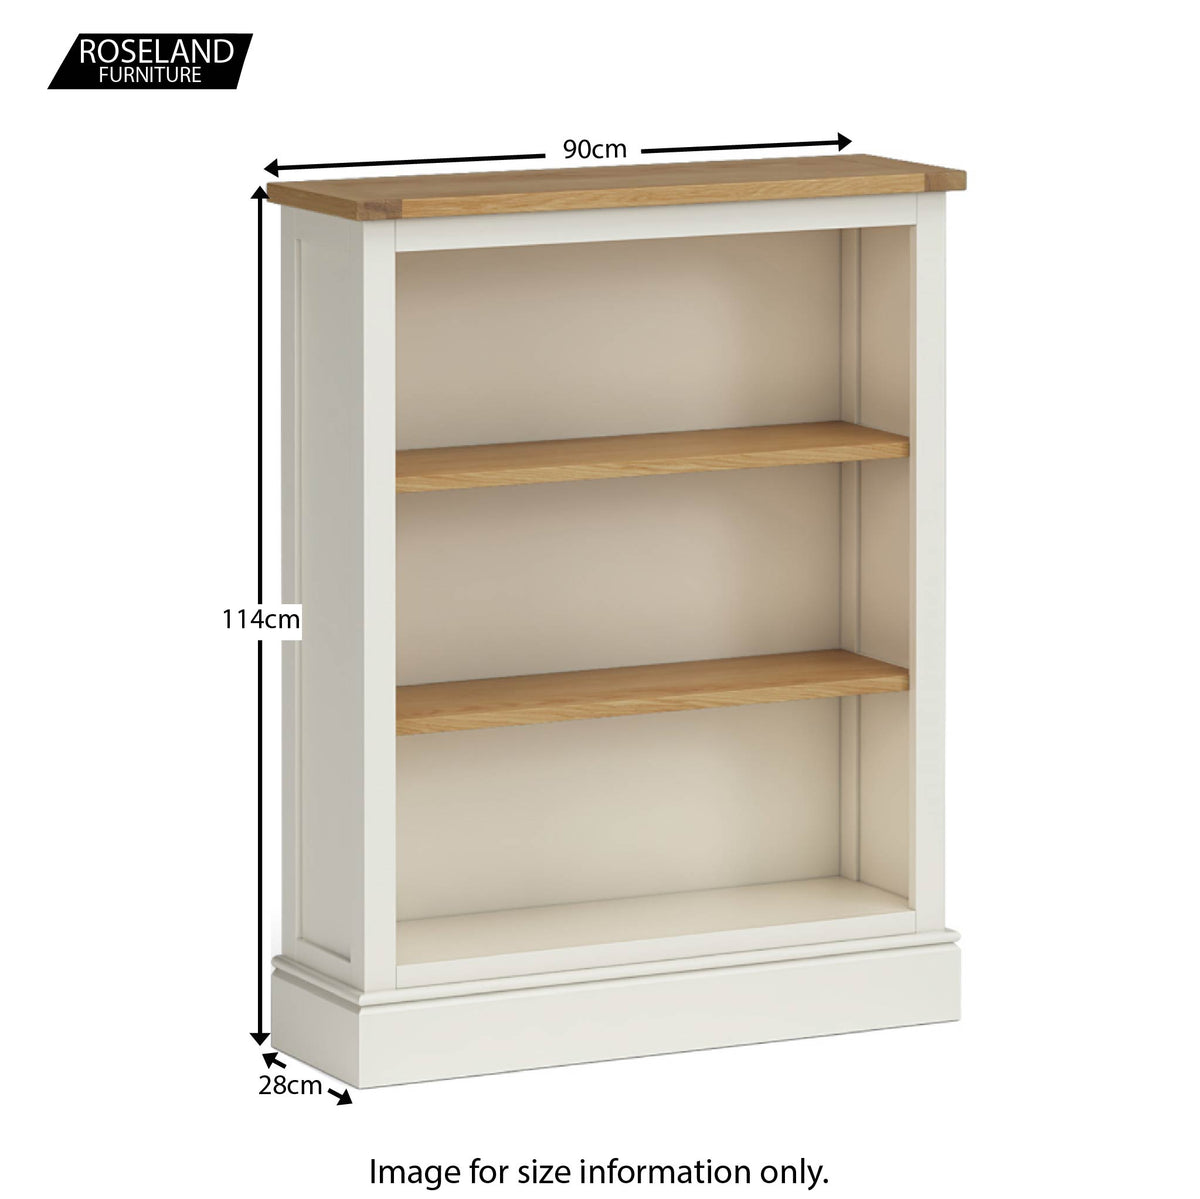 Chichester Small Bookcase in Ivory - Size Guide